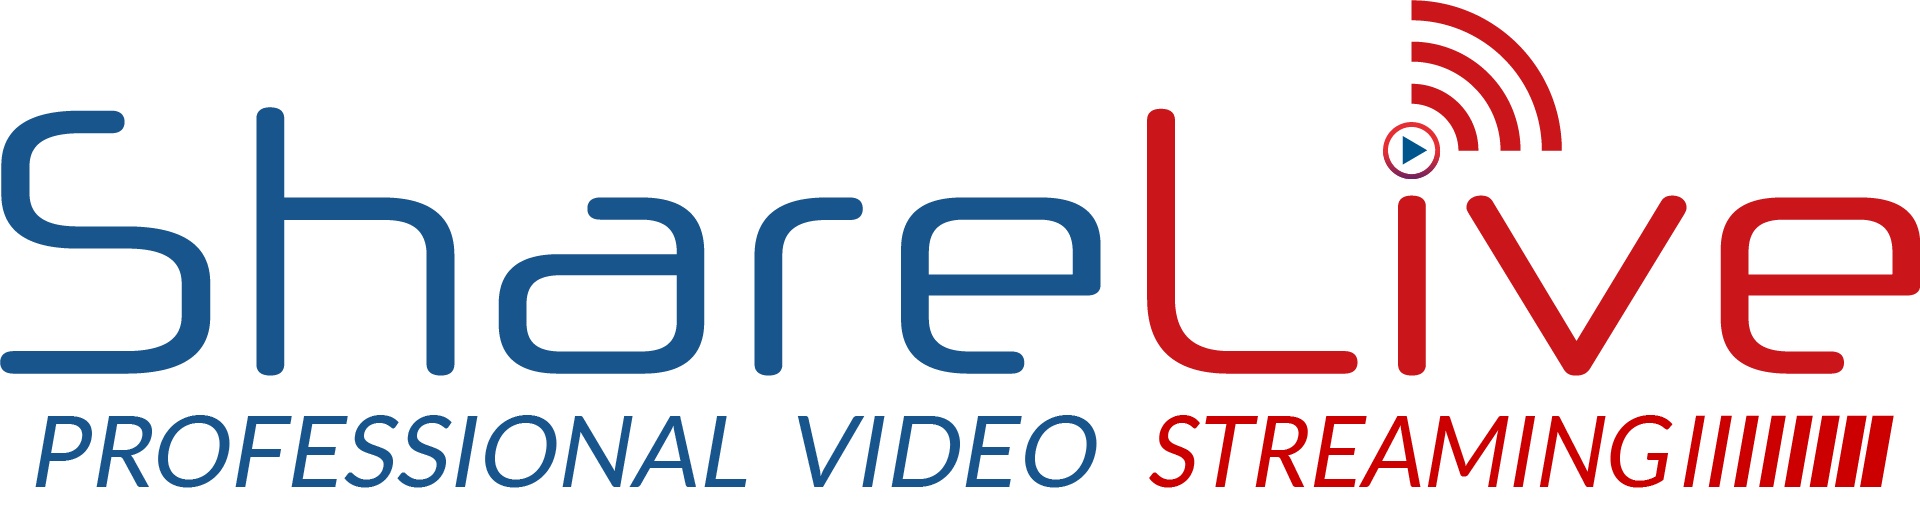 ShareLive - Professional Video Streaming